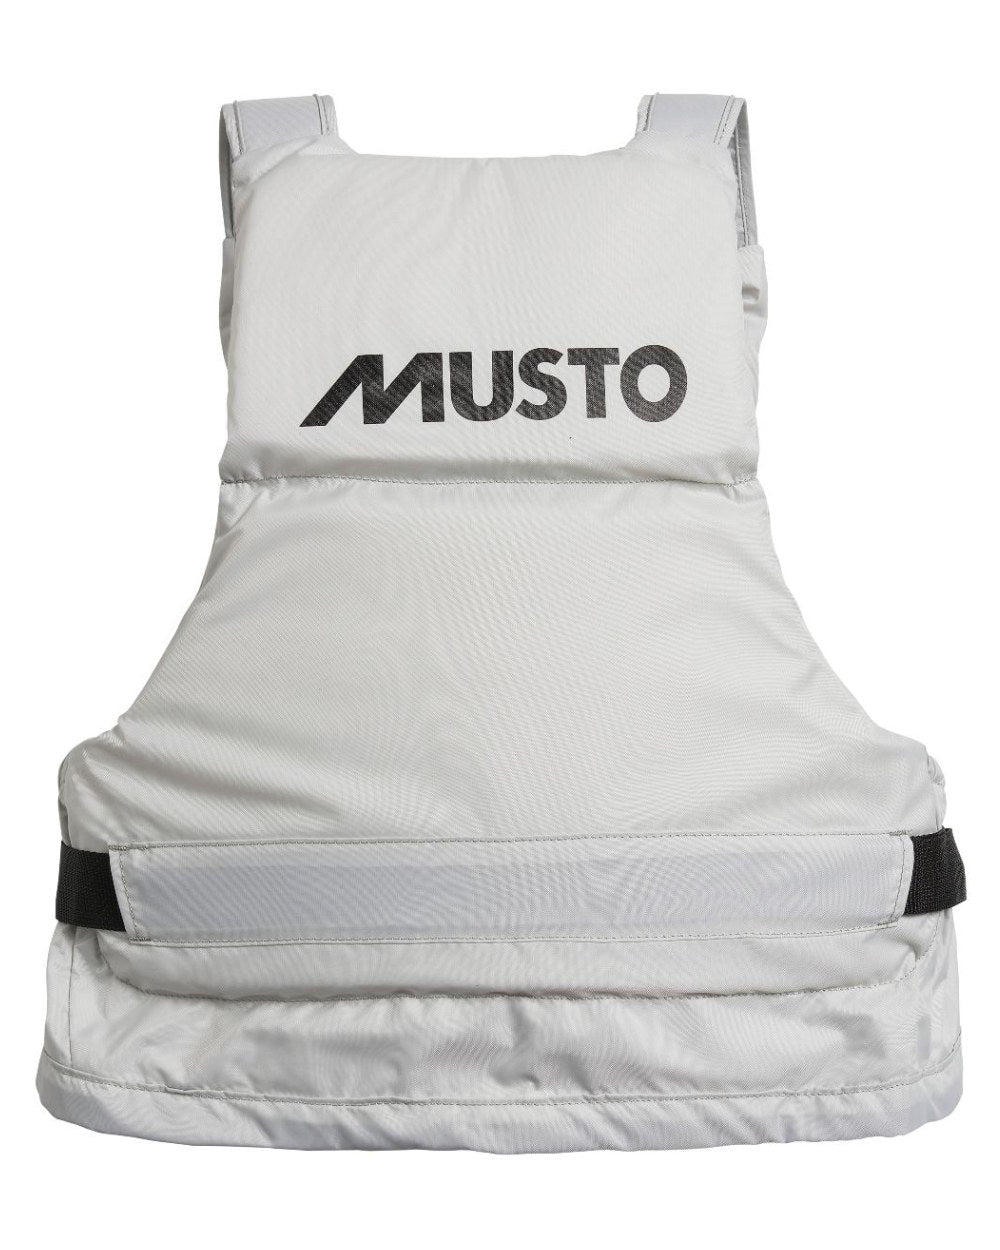 Platinum Coloured Musto Buoyancy Aid On A White Background 